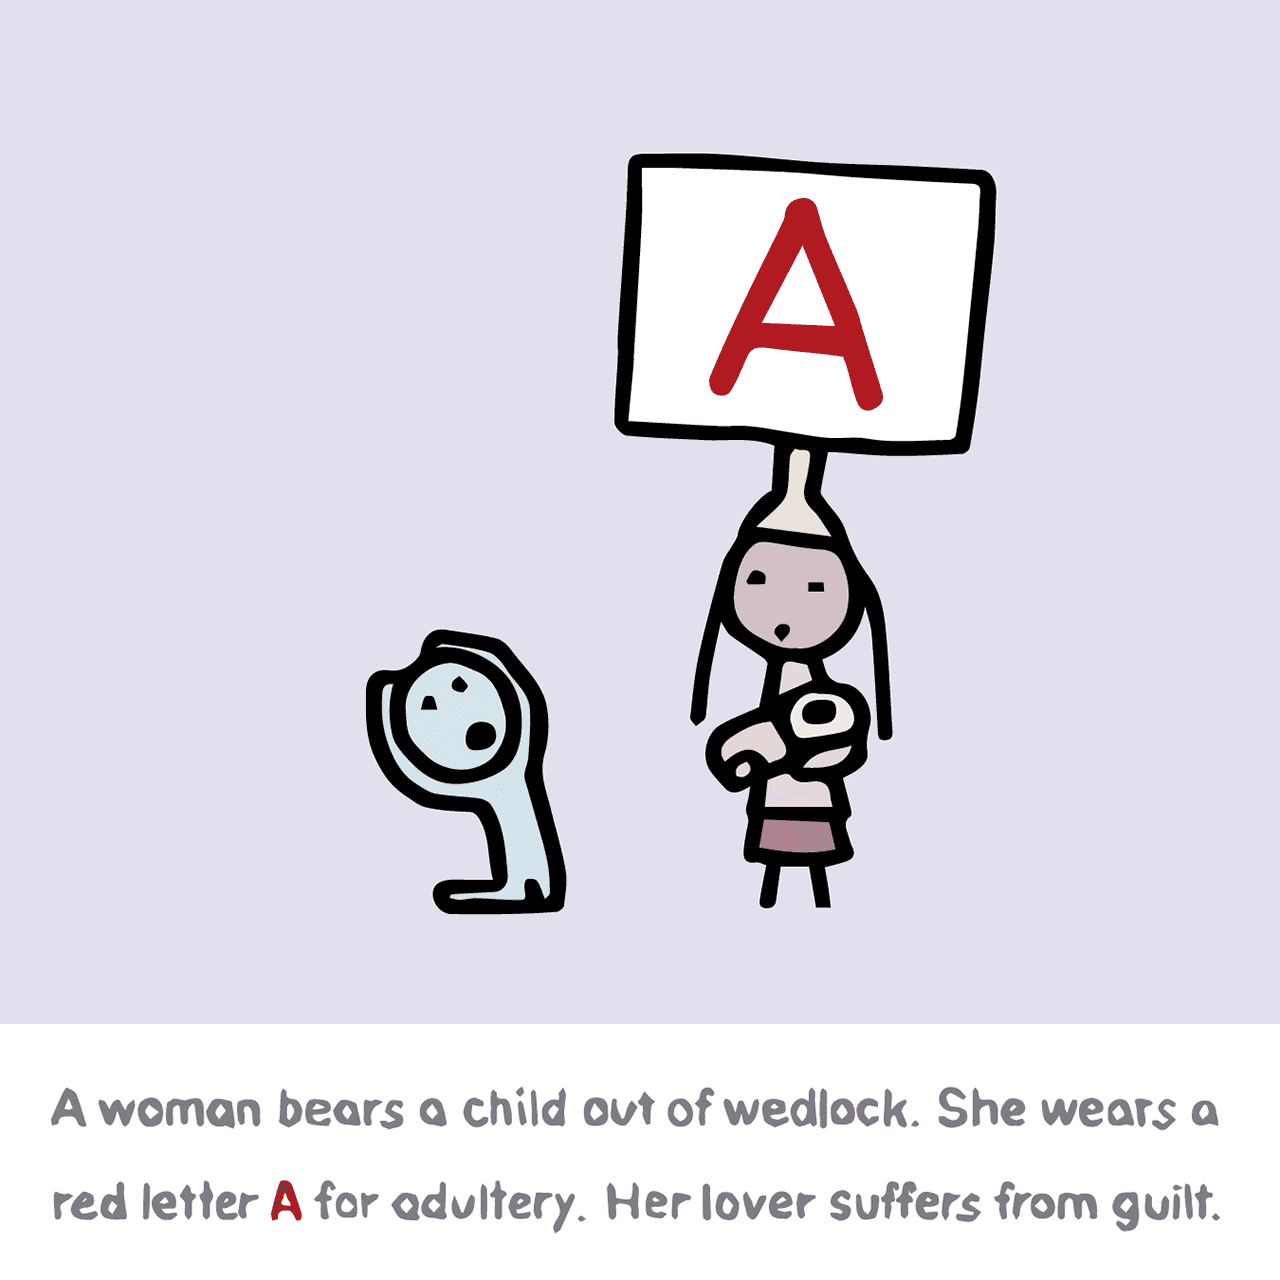 Nathaniel Hawthorne "The Scarlet Letter : A woman bears a child out of wedlock. She wears a red letter A for adultery. Her lover suffers from guilt."